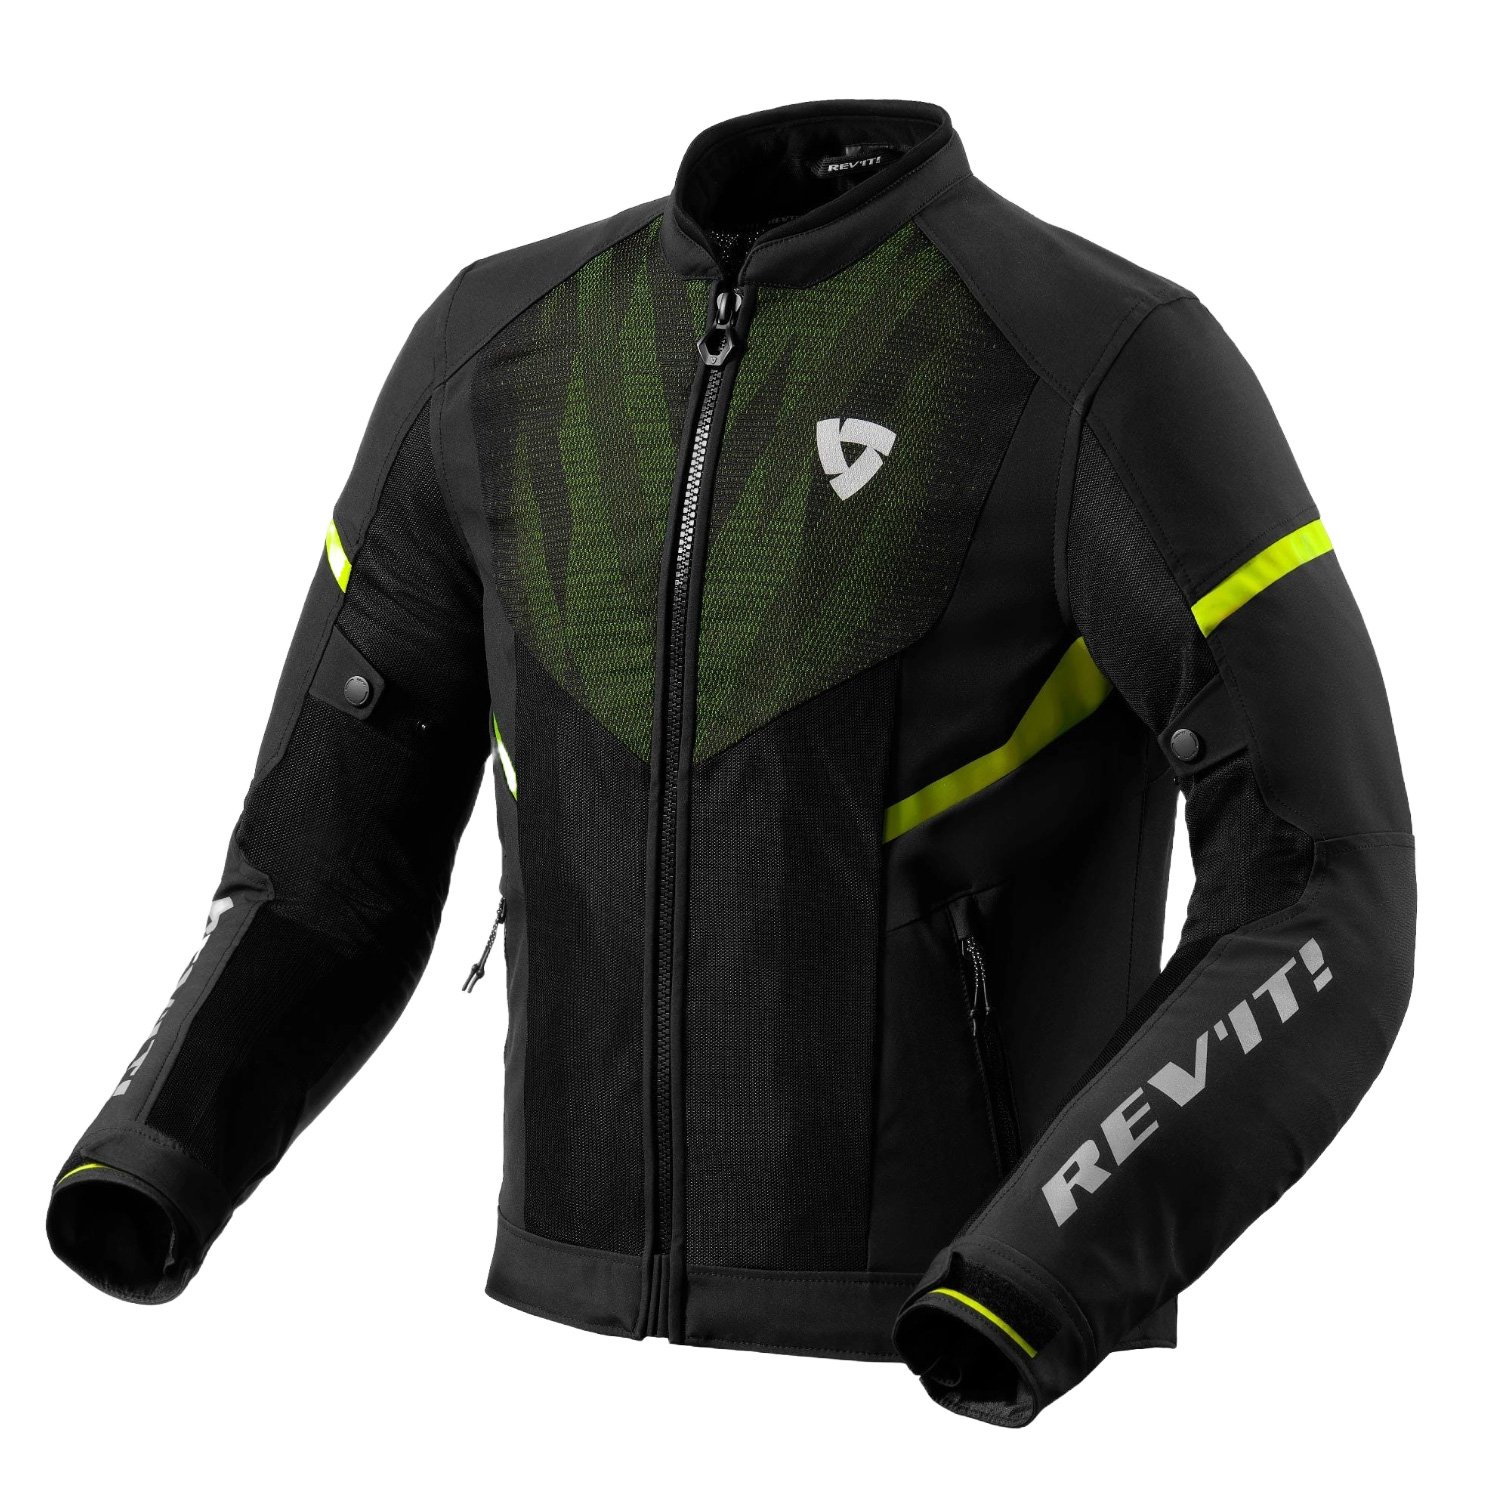 Image of REV'IT! Hyperspeed 2 GT Air Jacket Black Neon Yellow Size S ID 8700001367585